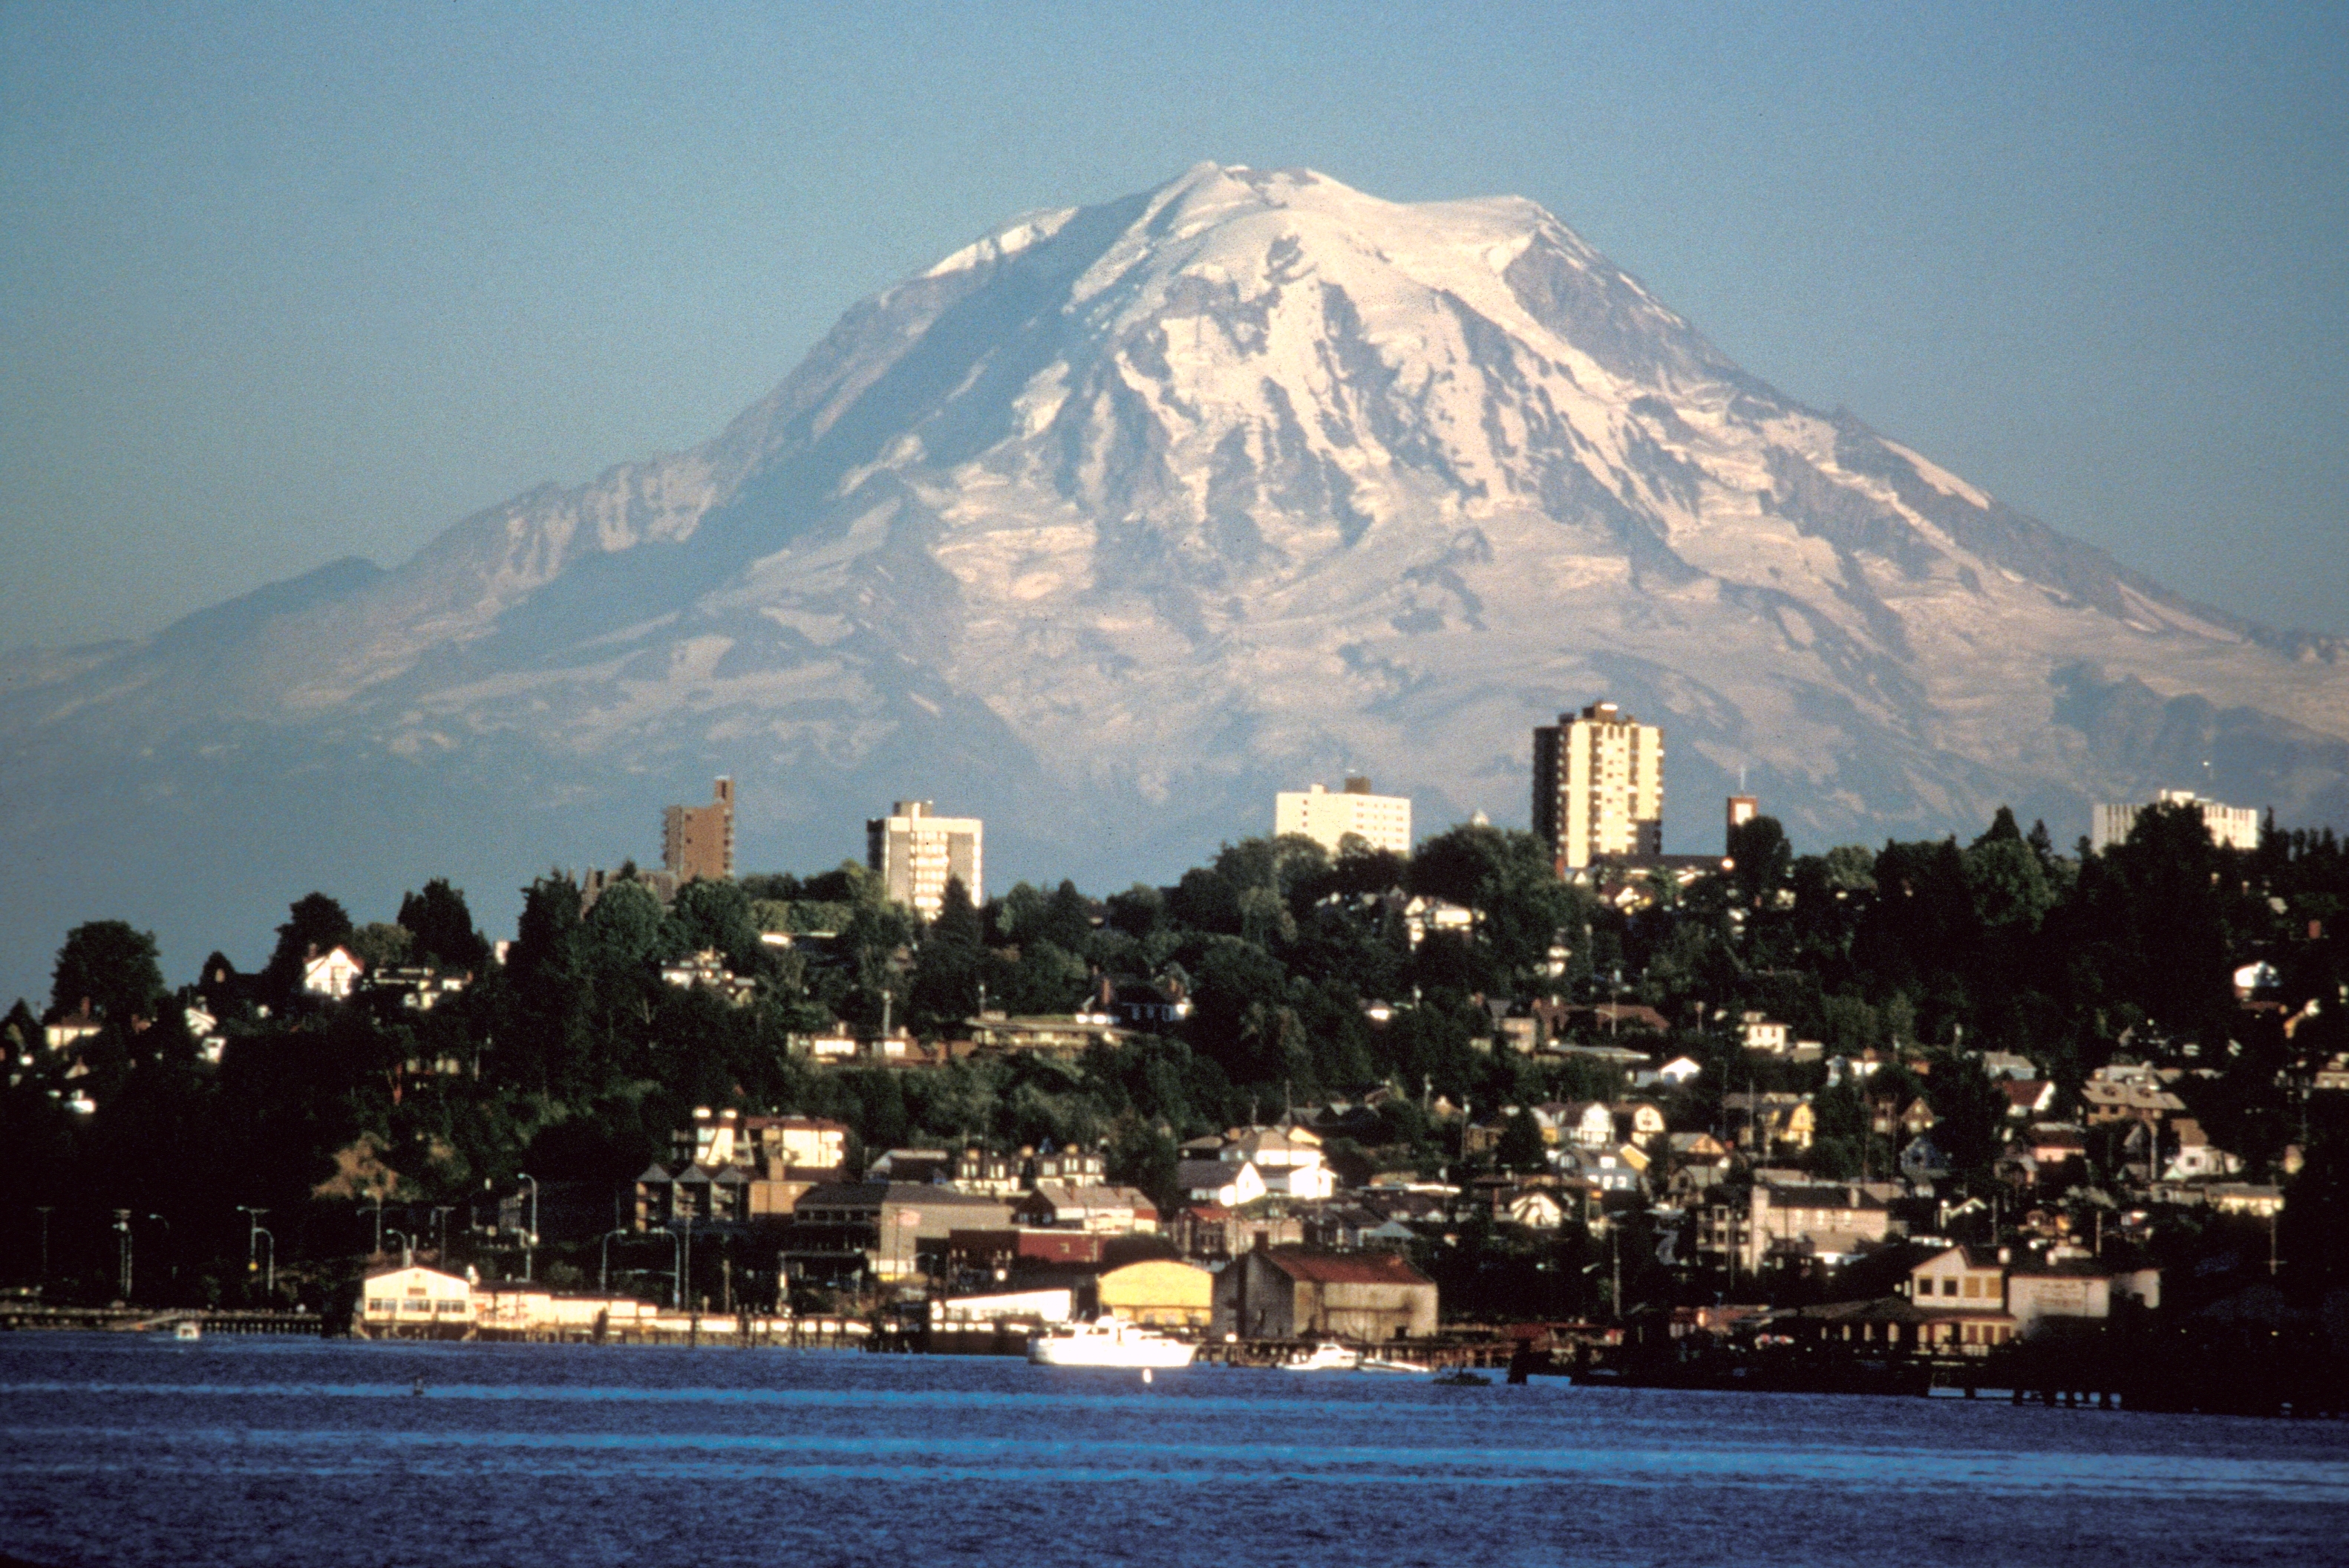 The Best of Tacoma – 3 Winning Attractions in Tacoma, WA | Alternative